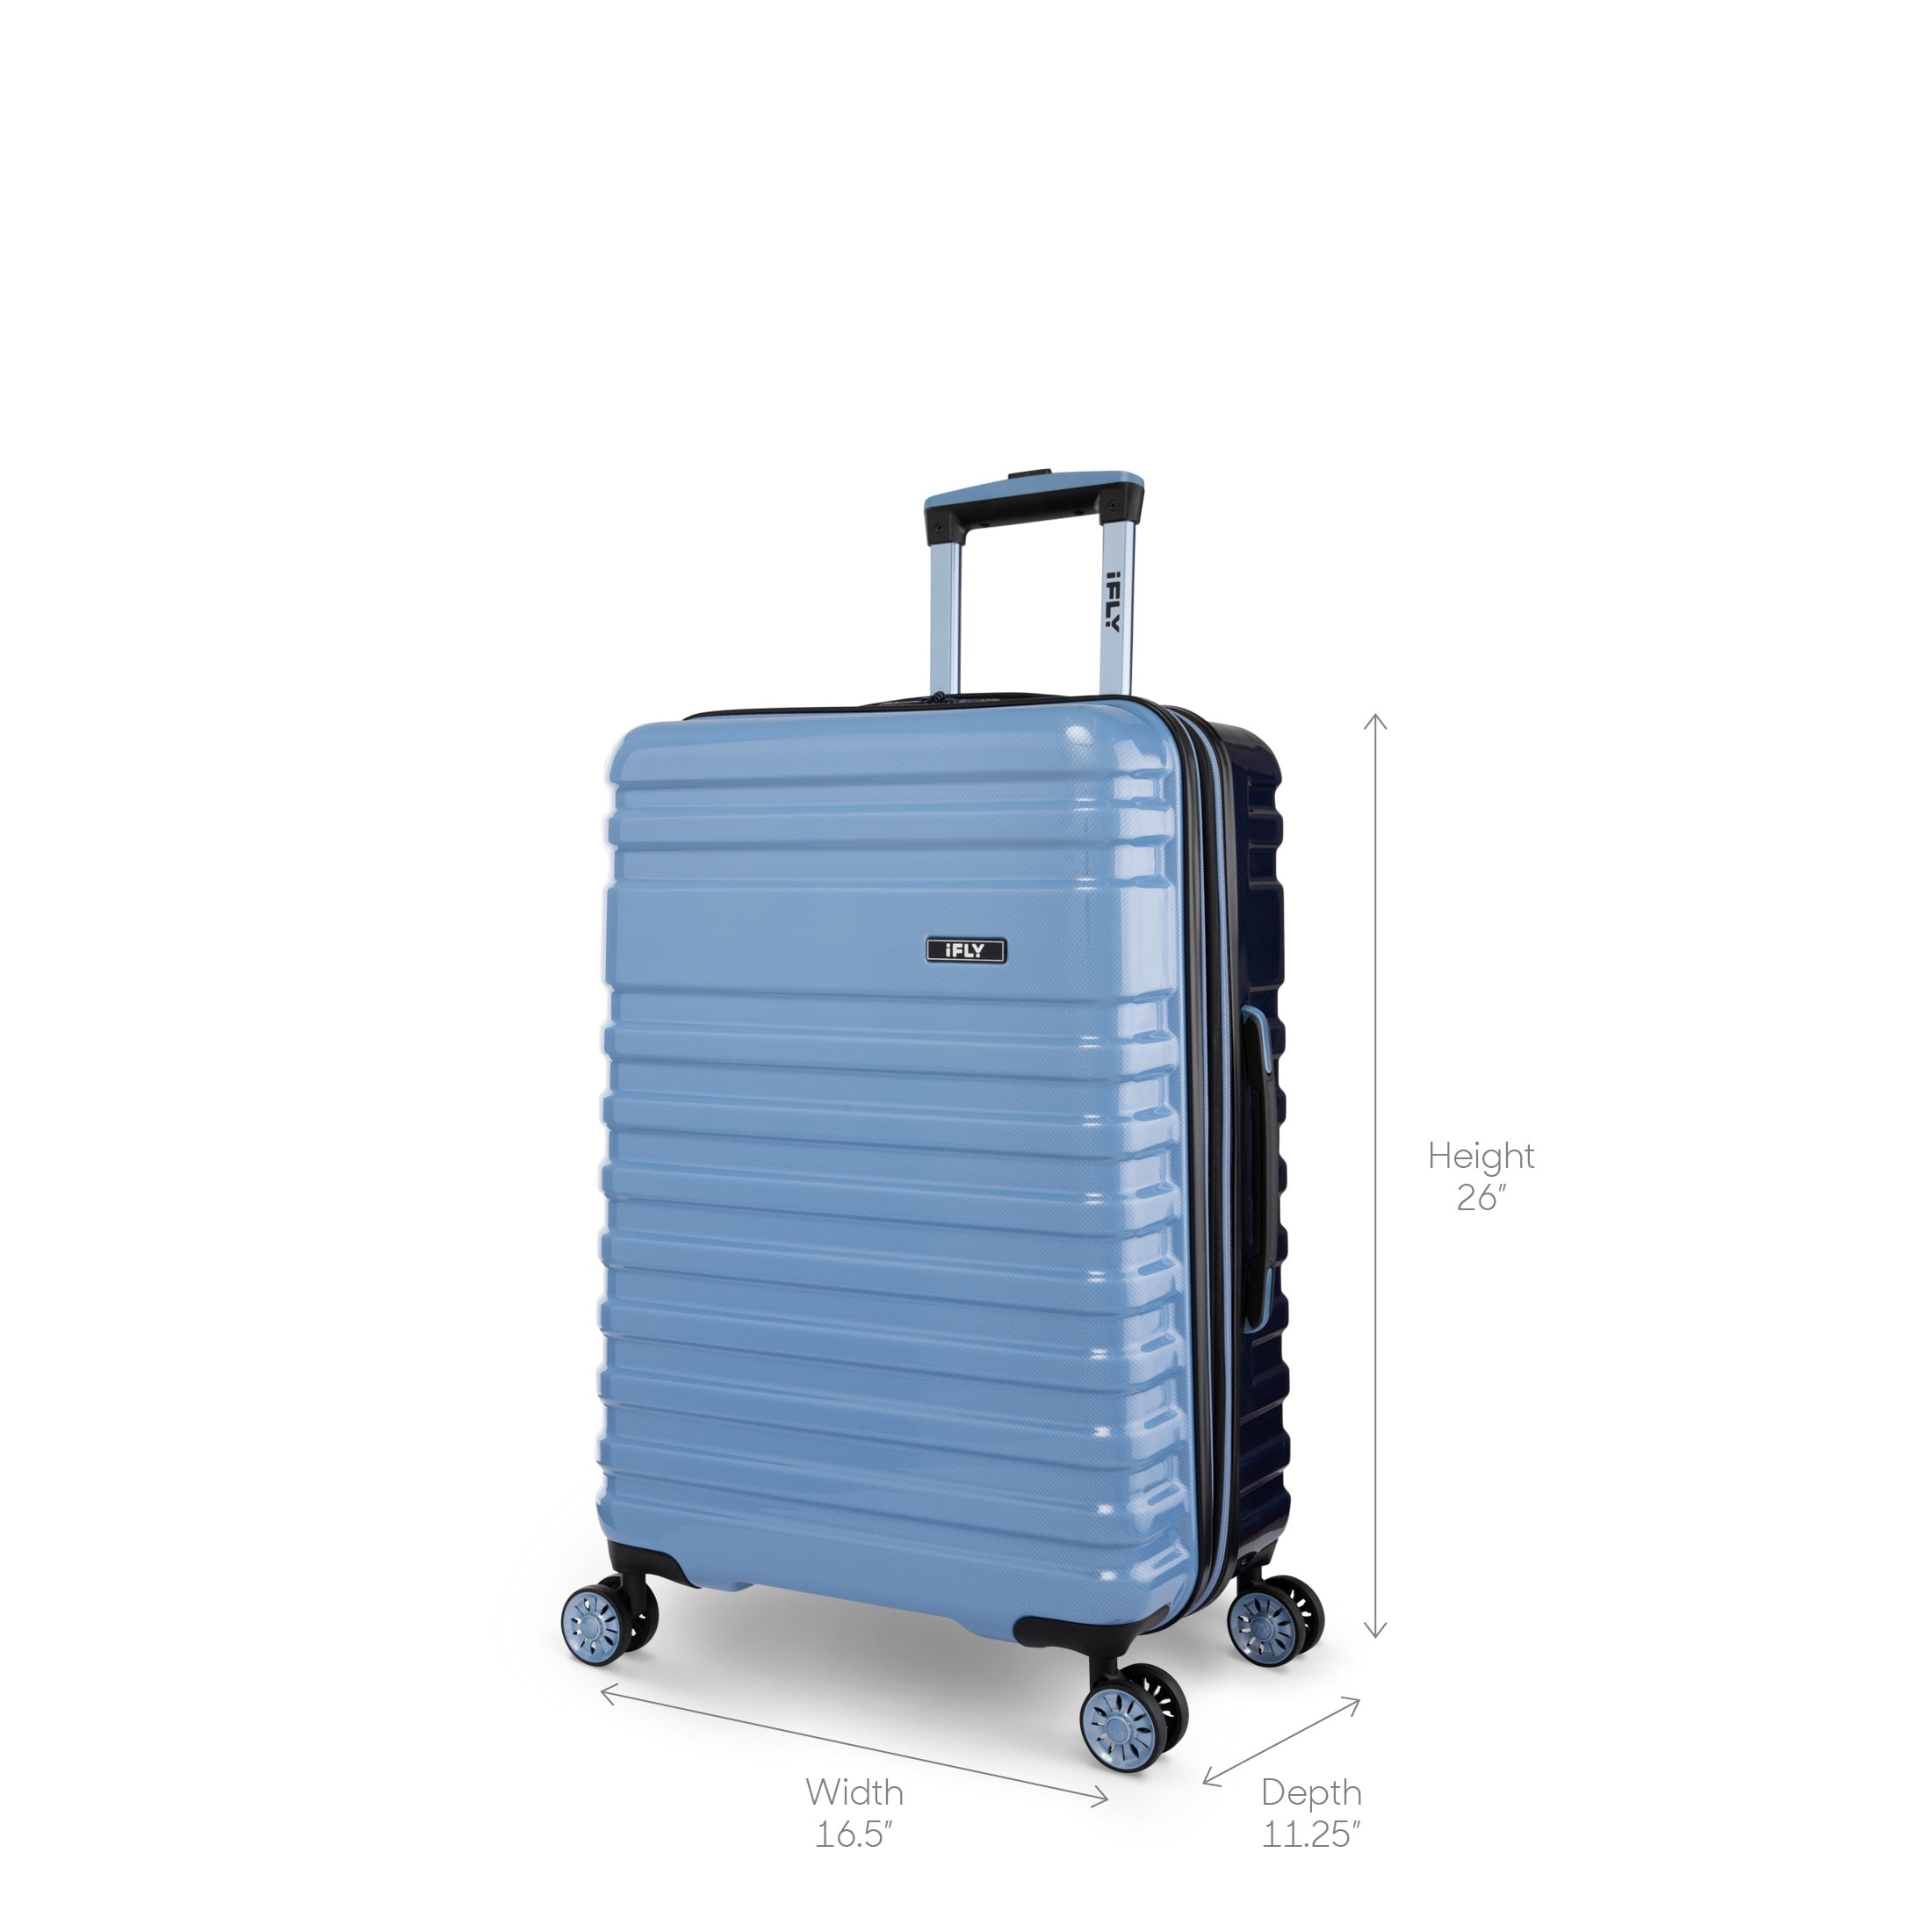 Buy IFLY Hardside Spectre Versus Luggage 24 Checked Luggage, Blue/Navy ...